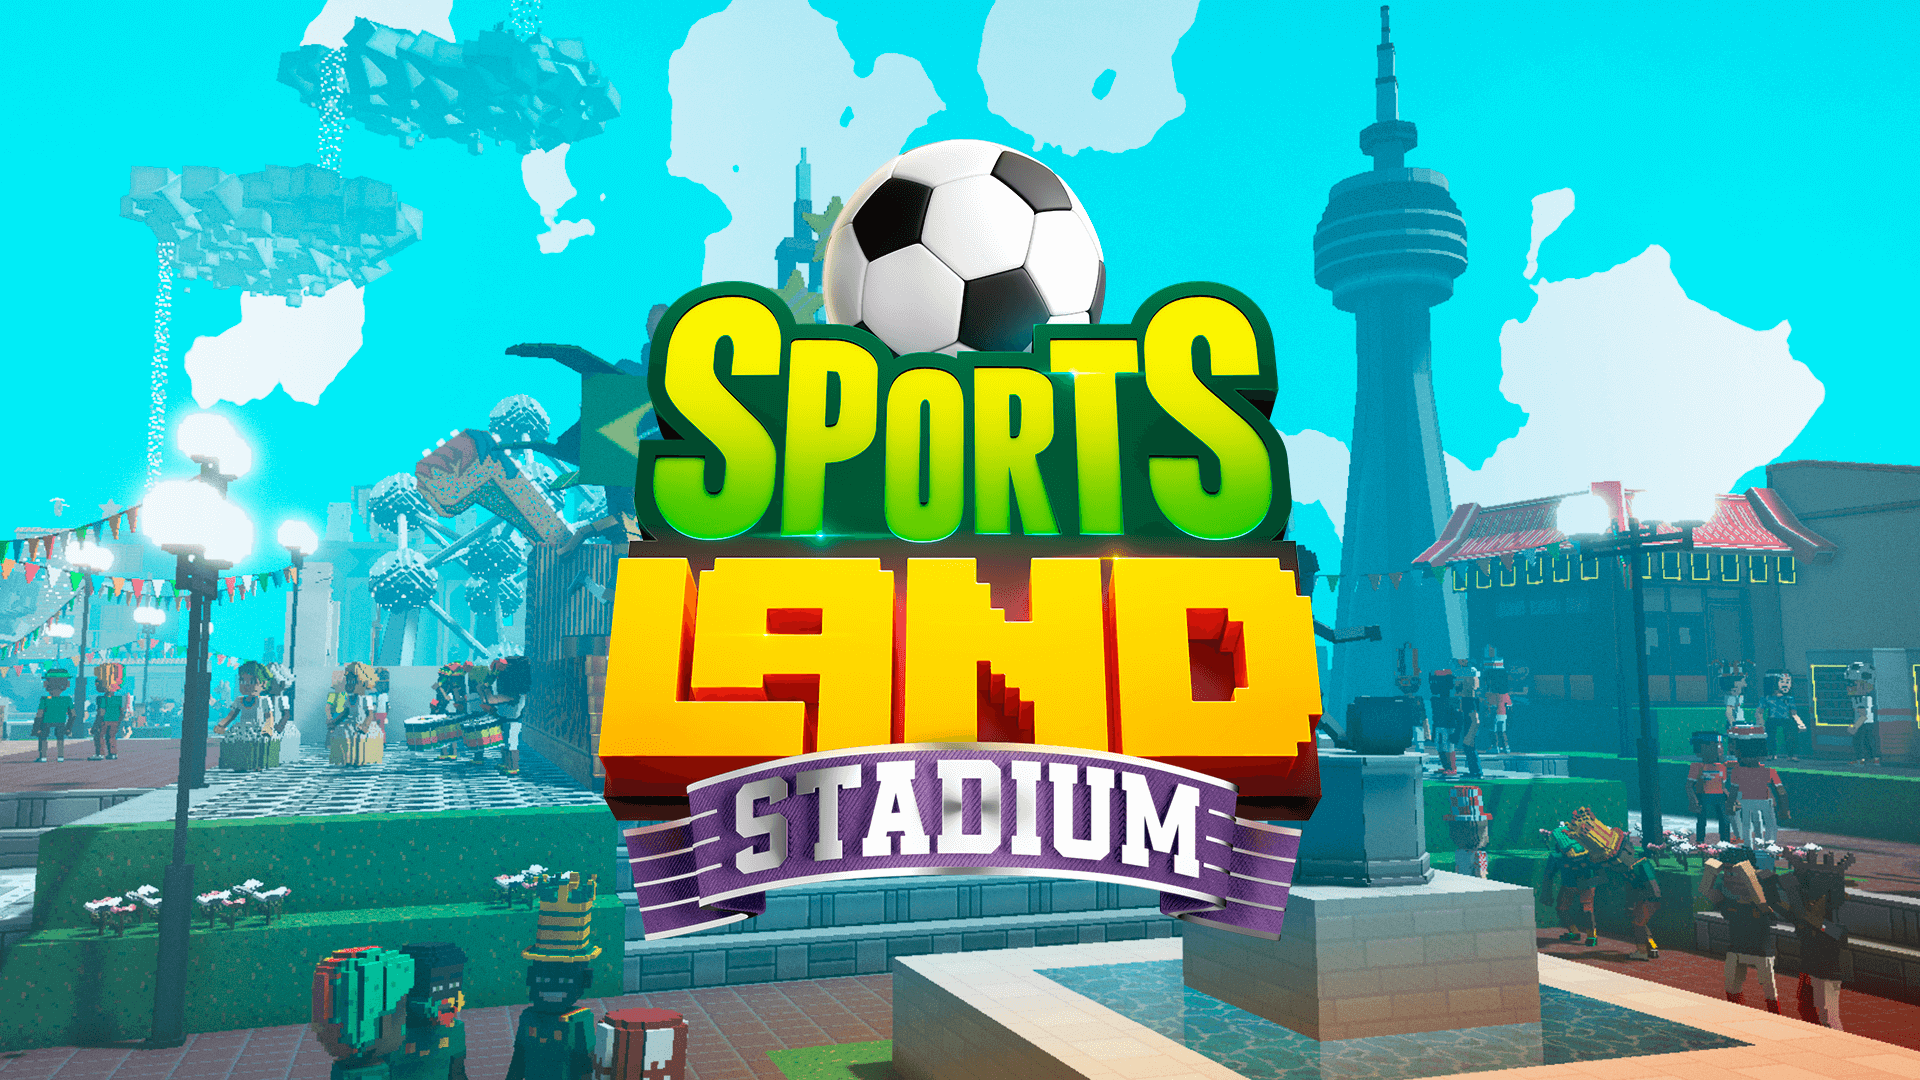 1,000+ Sports Land NFTs sold in less than 24 hours!